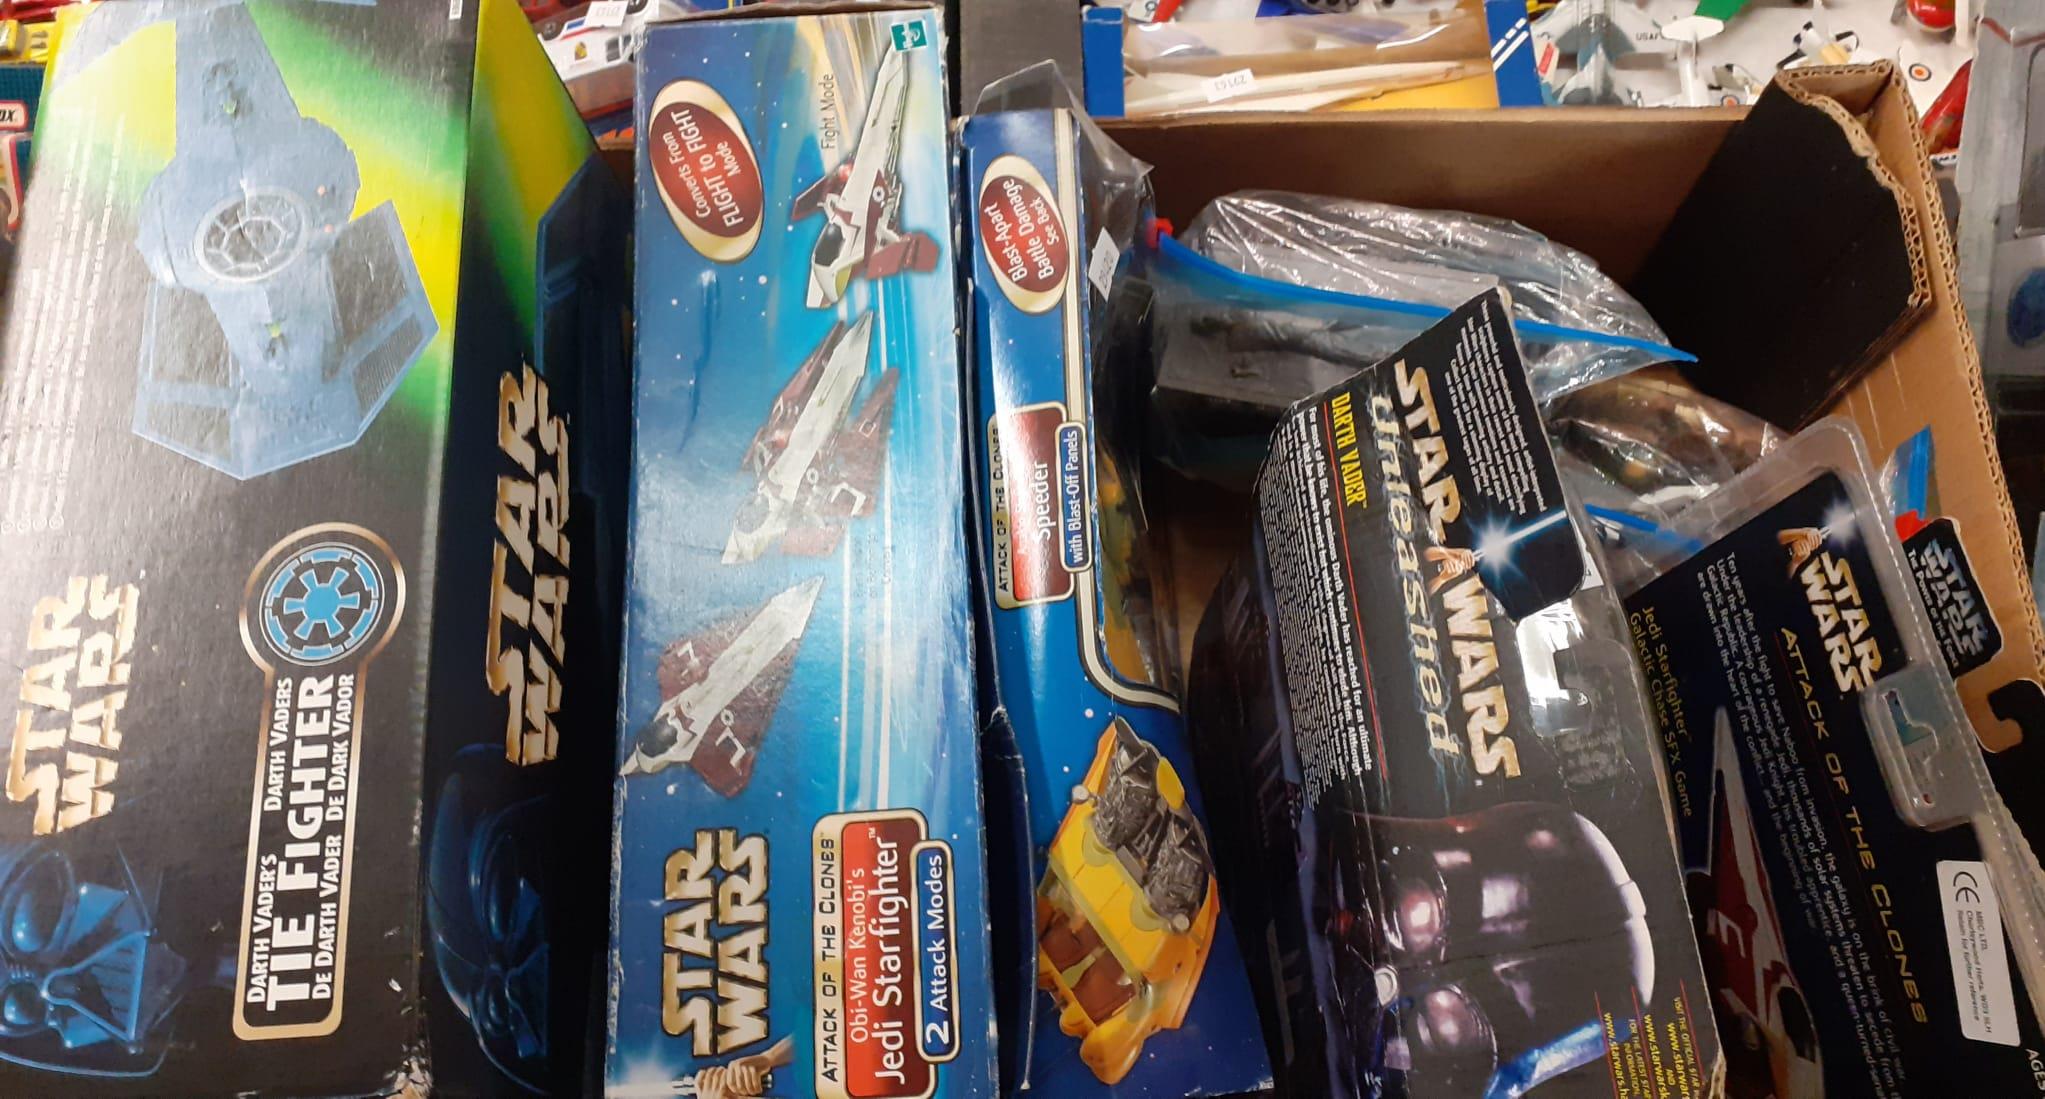 Box of assorted Star Wars items to include: Chewbacca figurines in original packaging, Star Wars